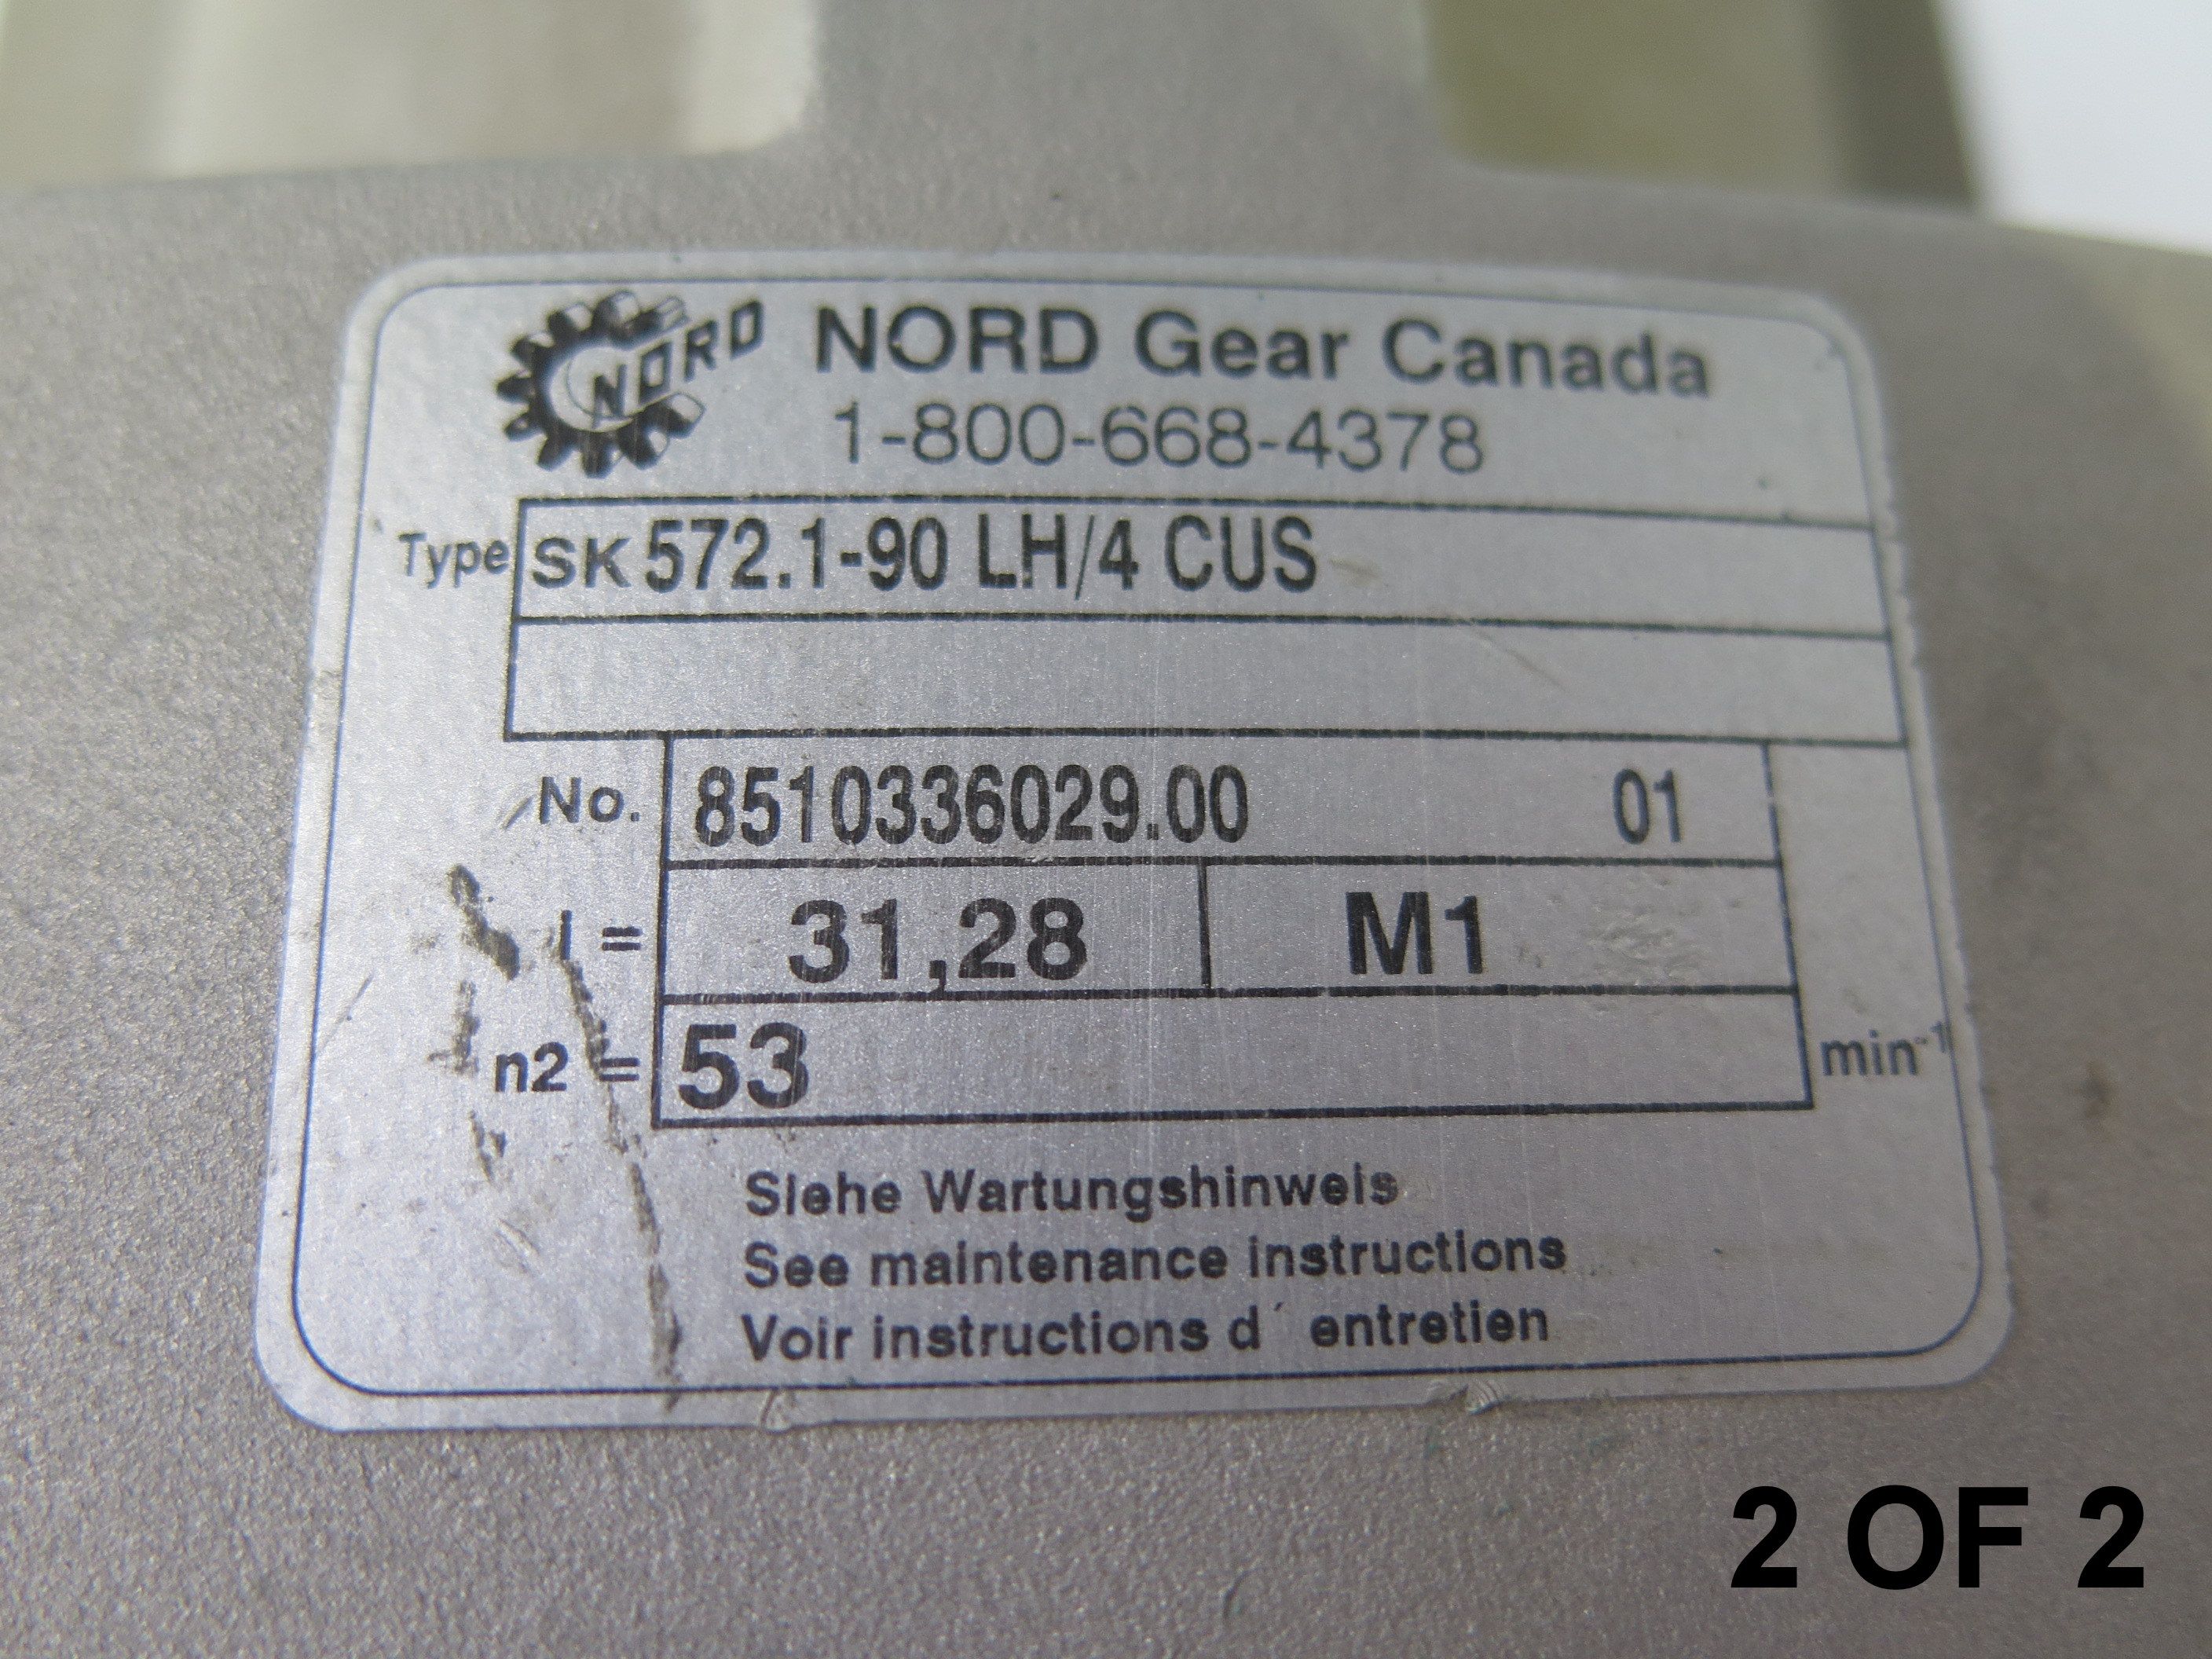 GEAR BOX - NORD 572.1-90 LH/4 CUS - 2 HP - RATIO: 31.28 to 1